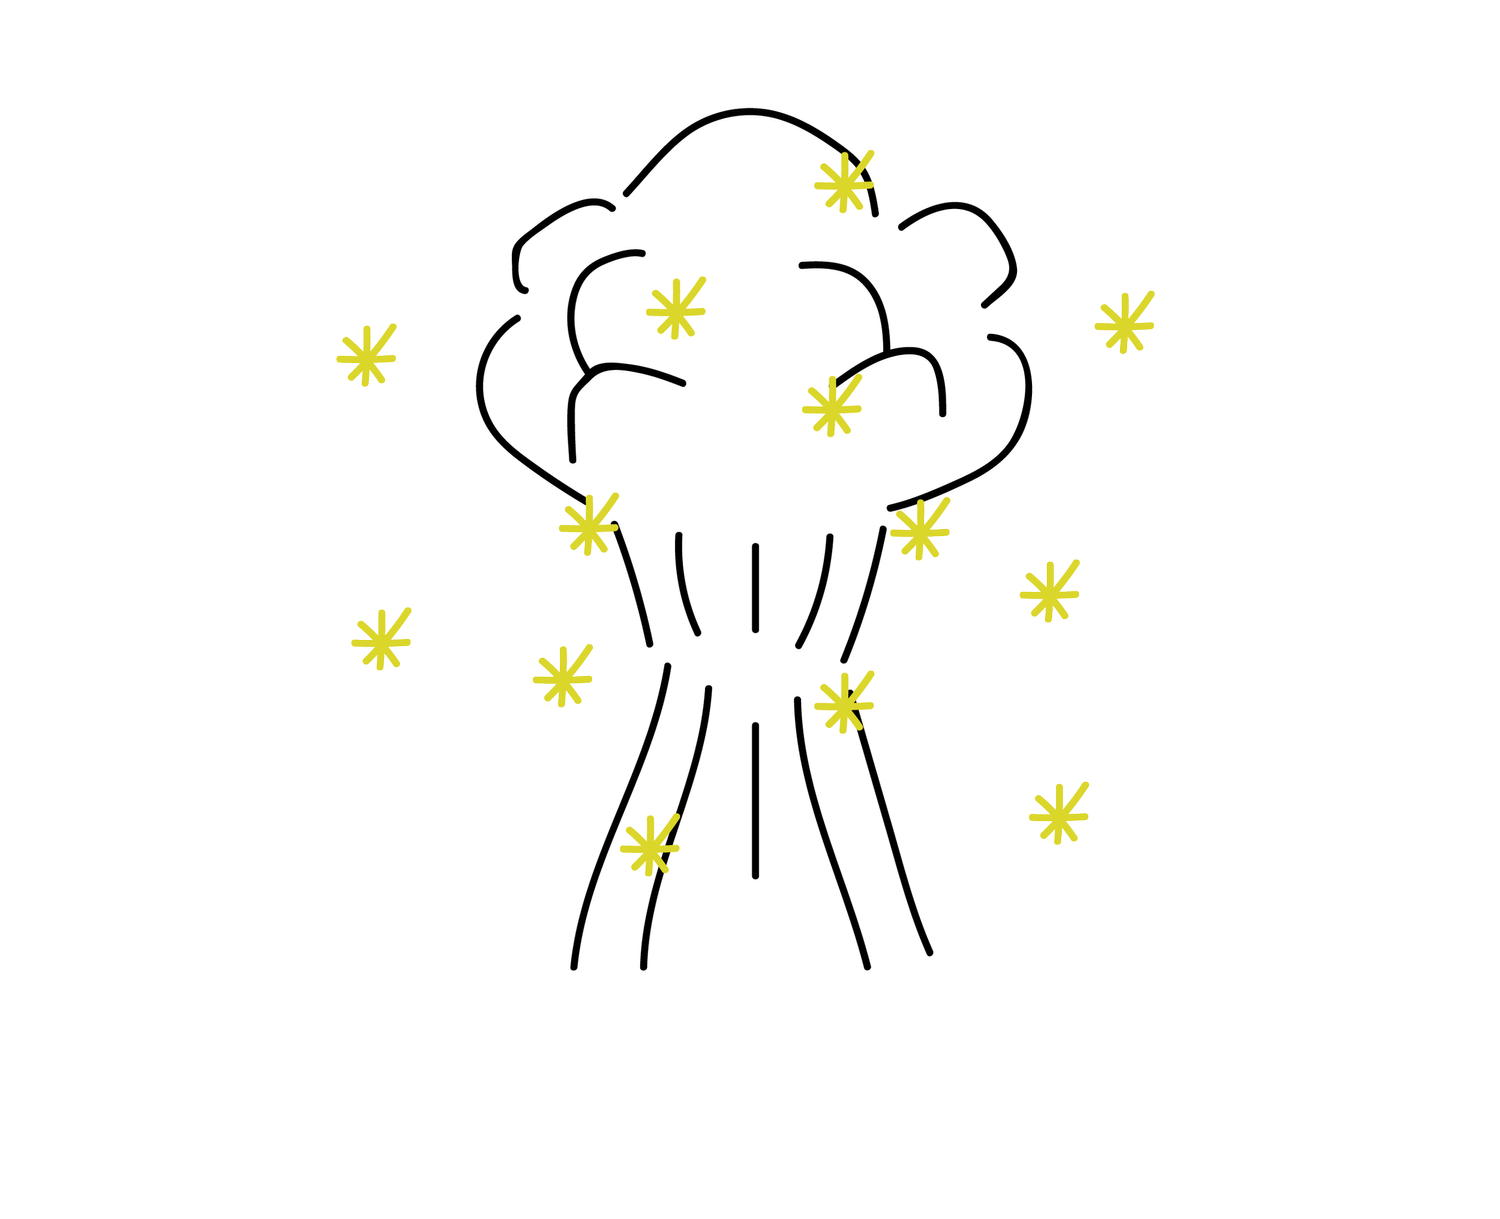 iWorkMagicDaily Productions